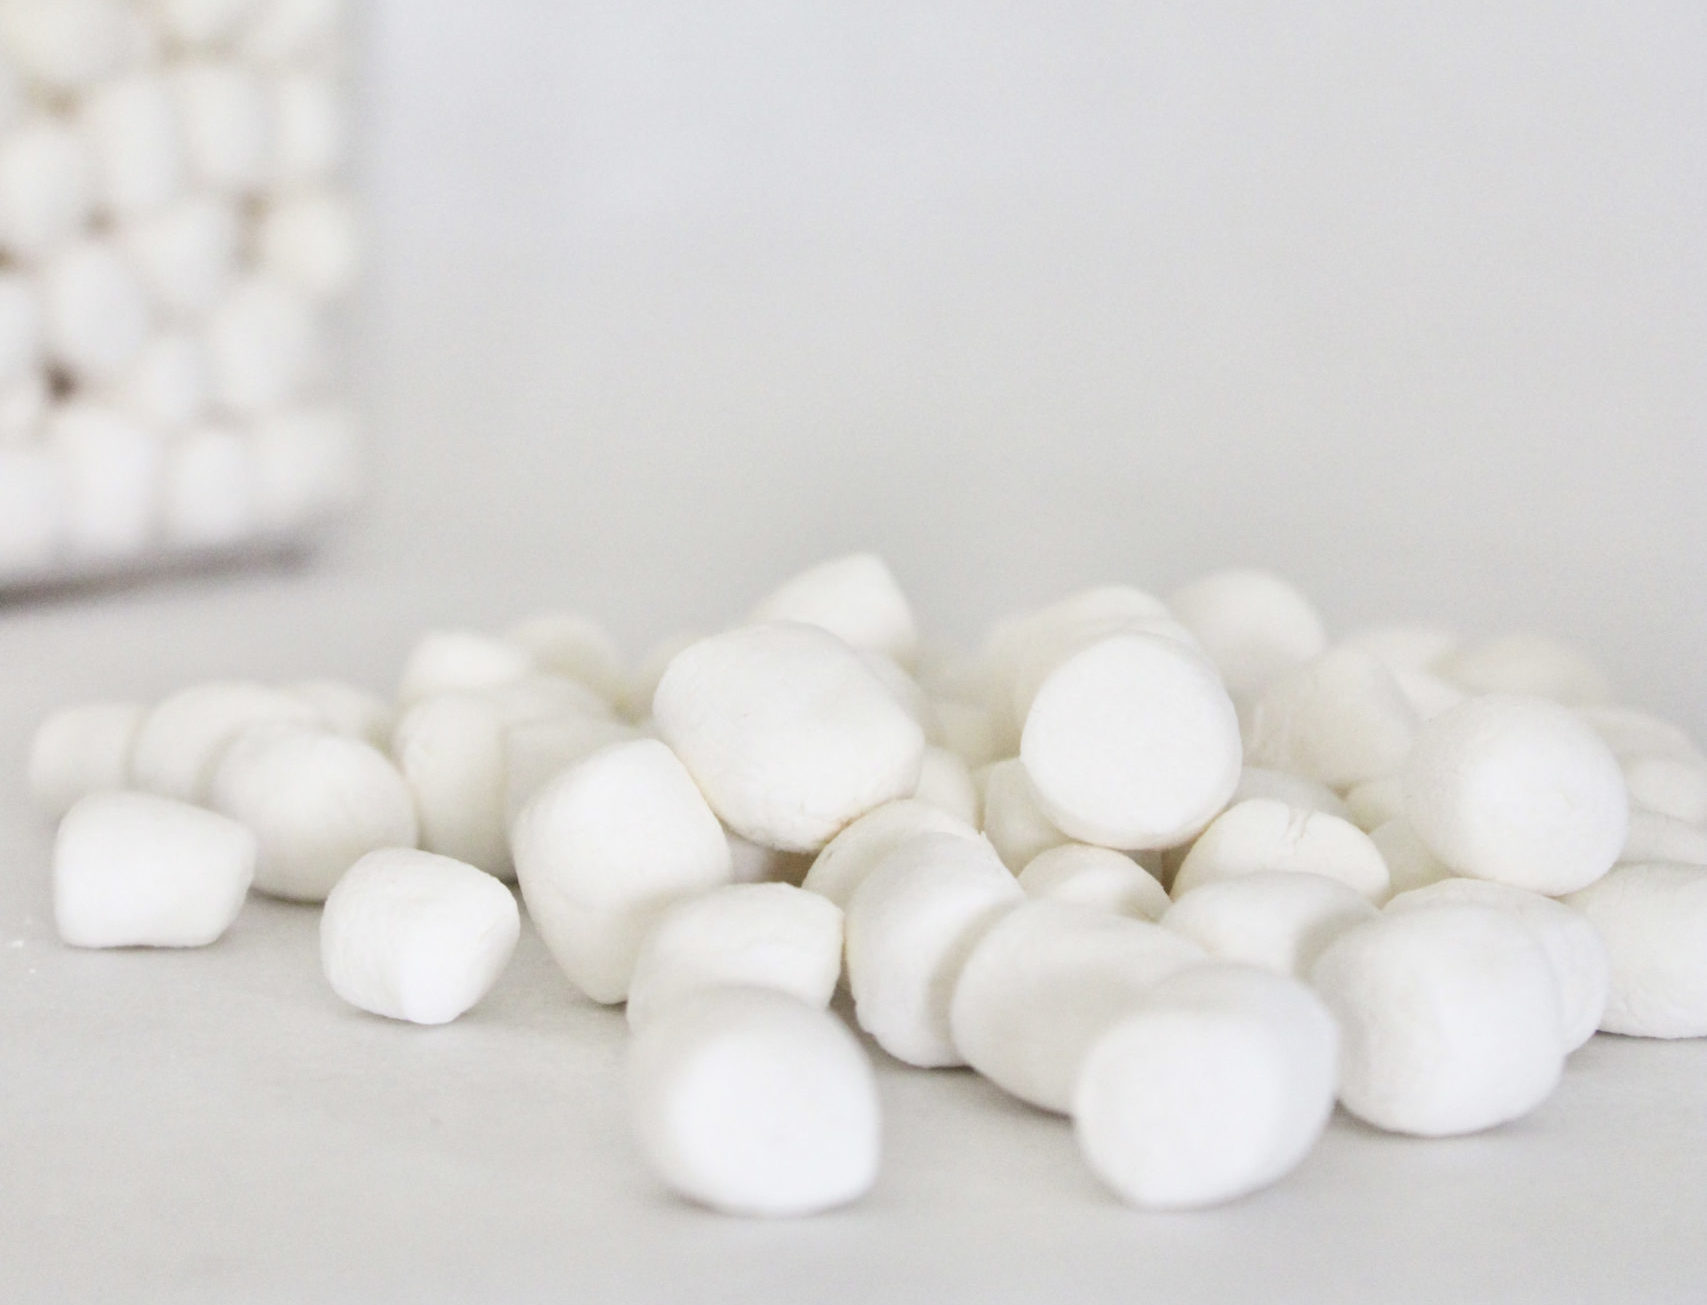 Dehydrating Marshmallows - Includes Oven Instructions - Our Little